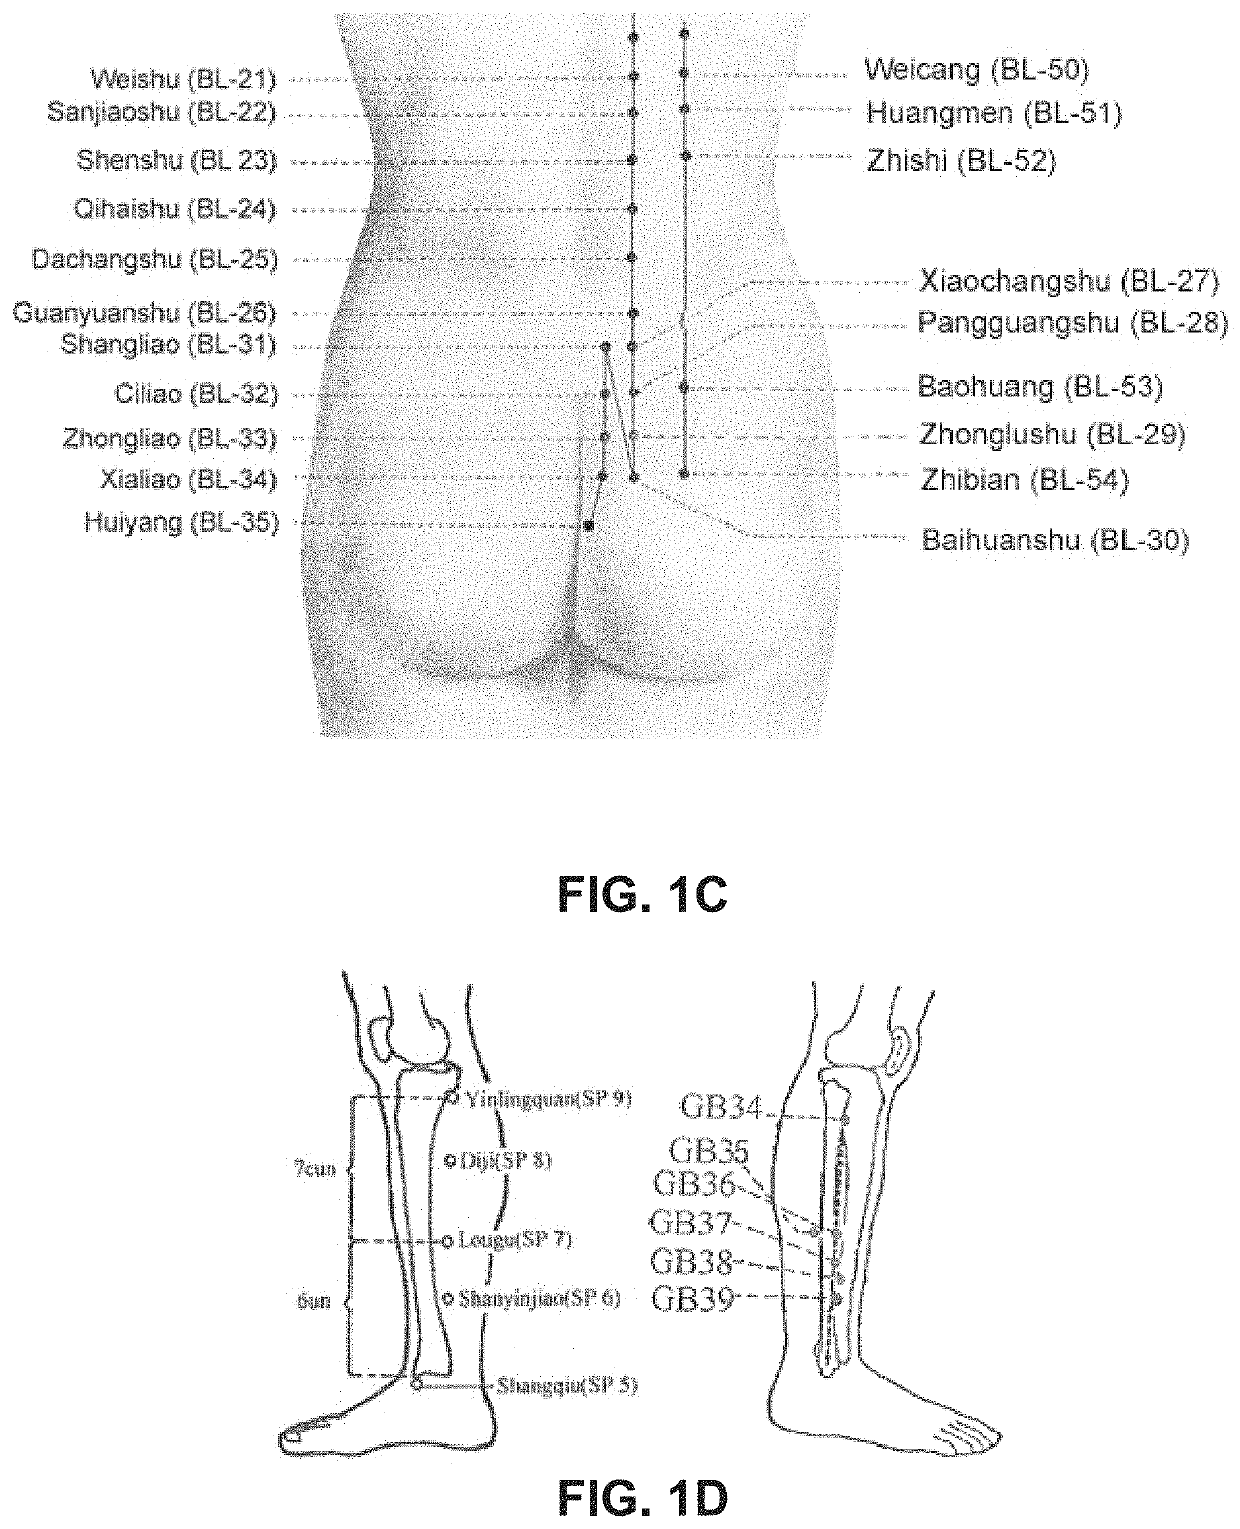 Systems, methods and devices for peripheral neuromodulation for treating diseases related to overactive bladder